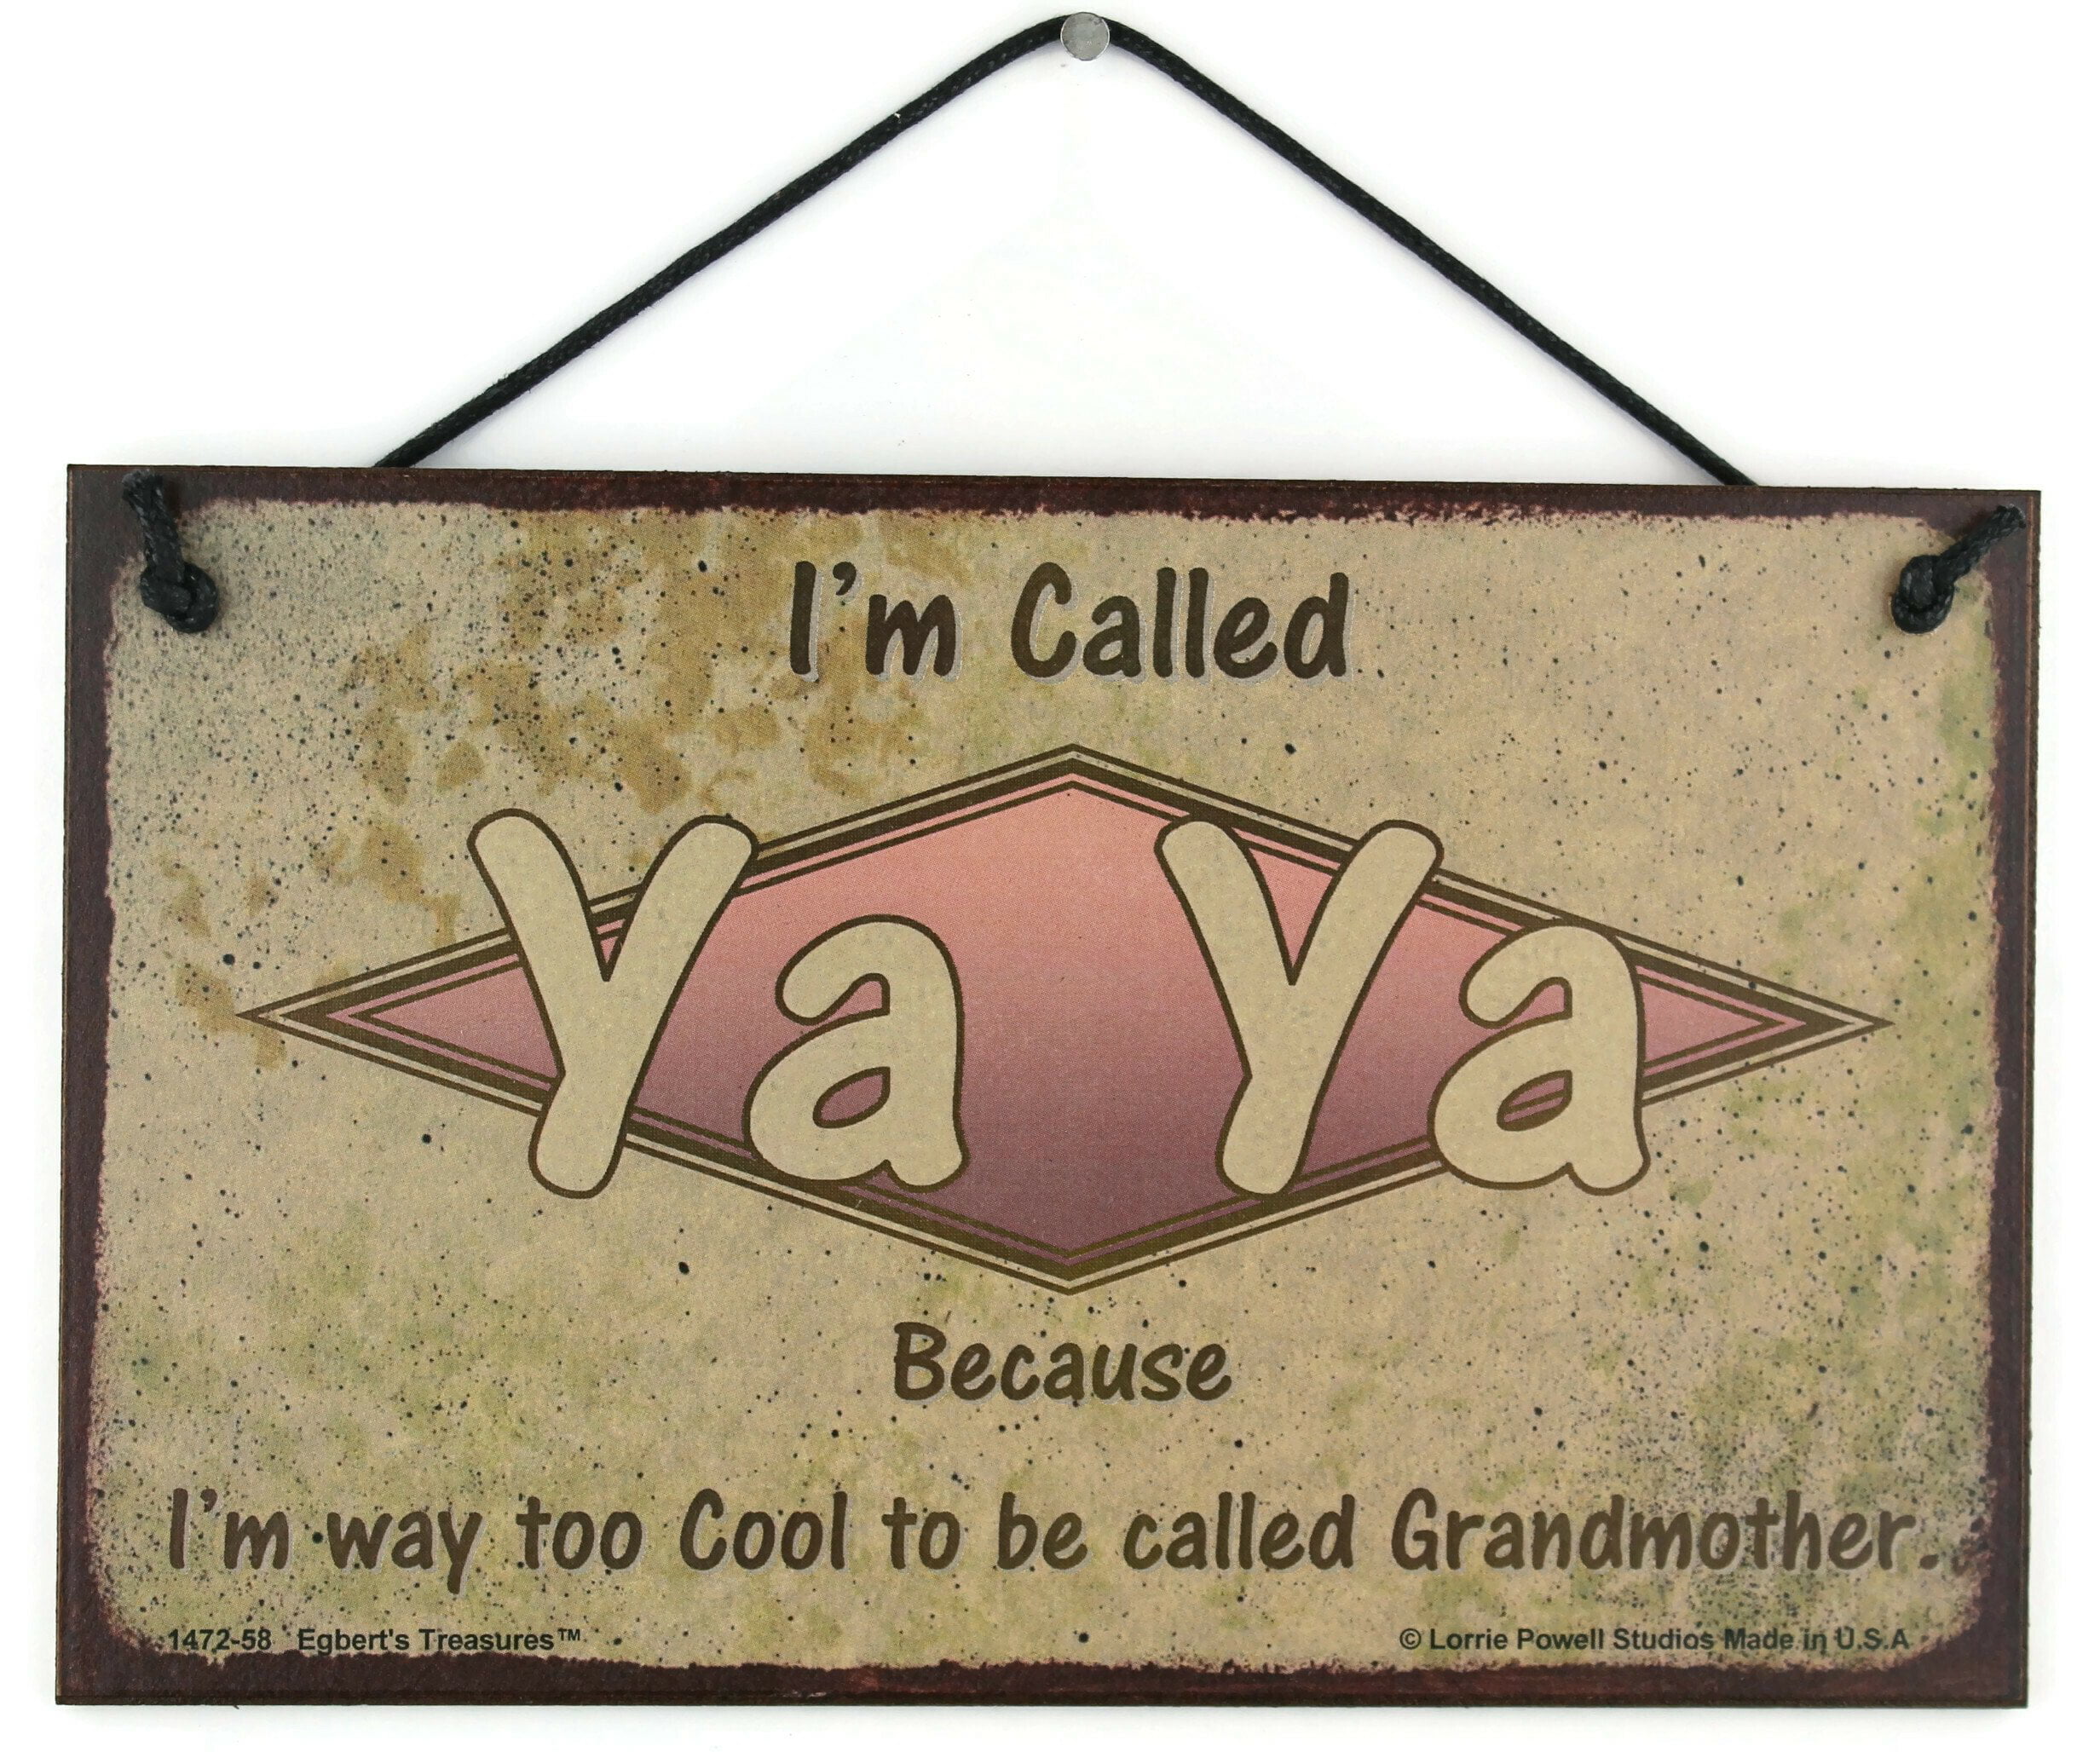 Just Call Me Ya Ya Too Cool To Be Called Grandmother Roses SIGN Plaque 5"X10"